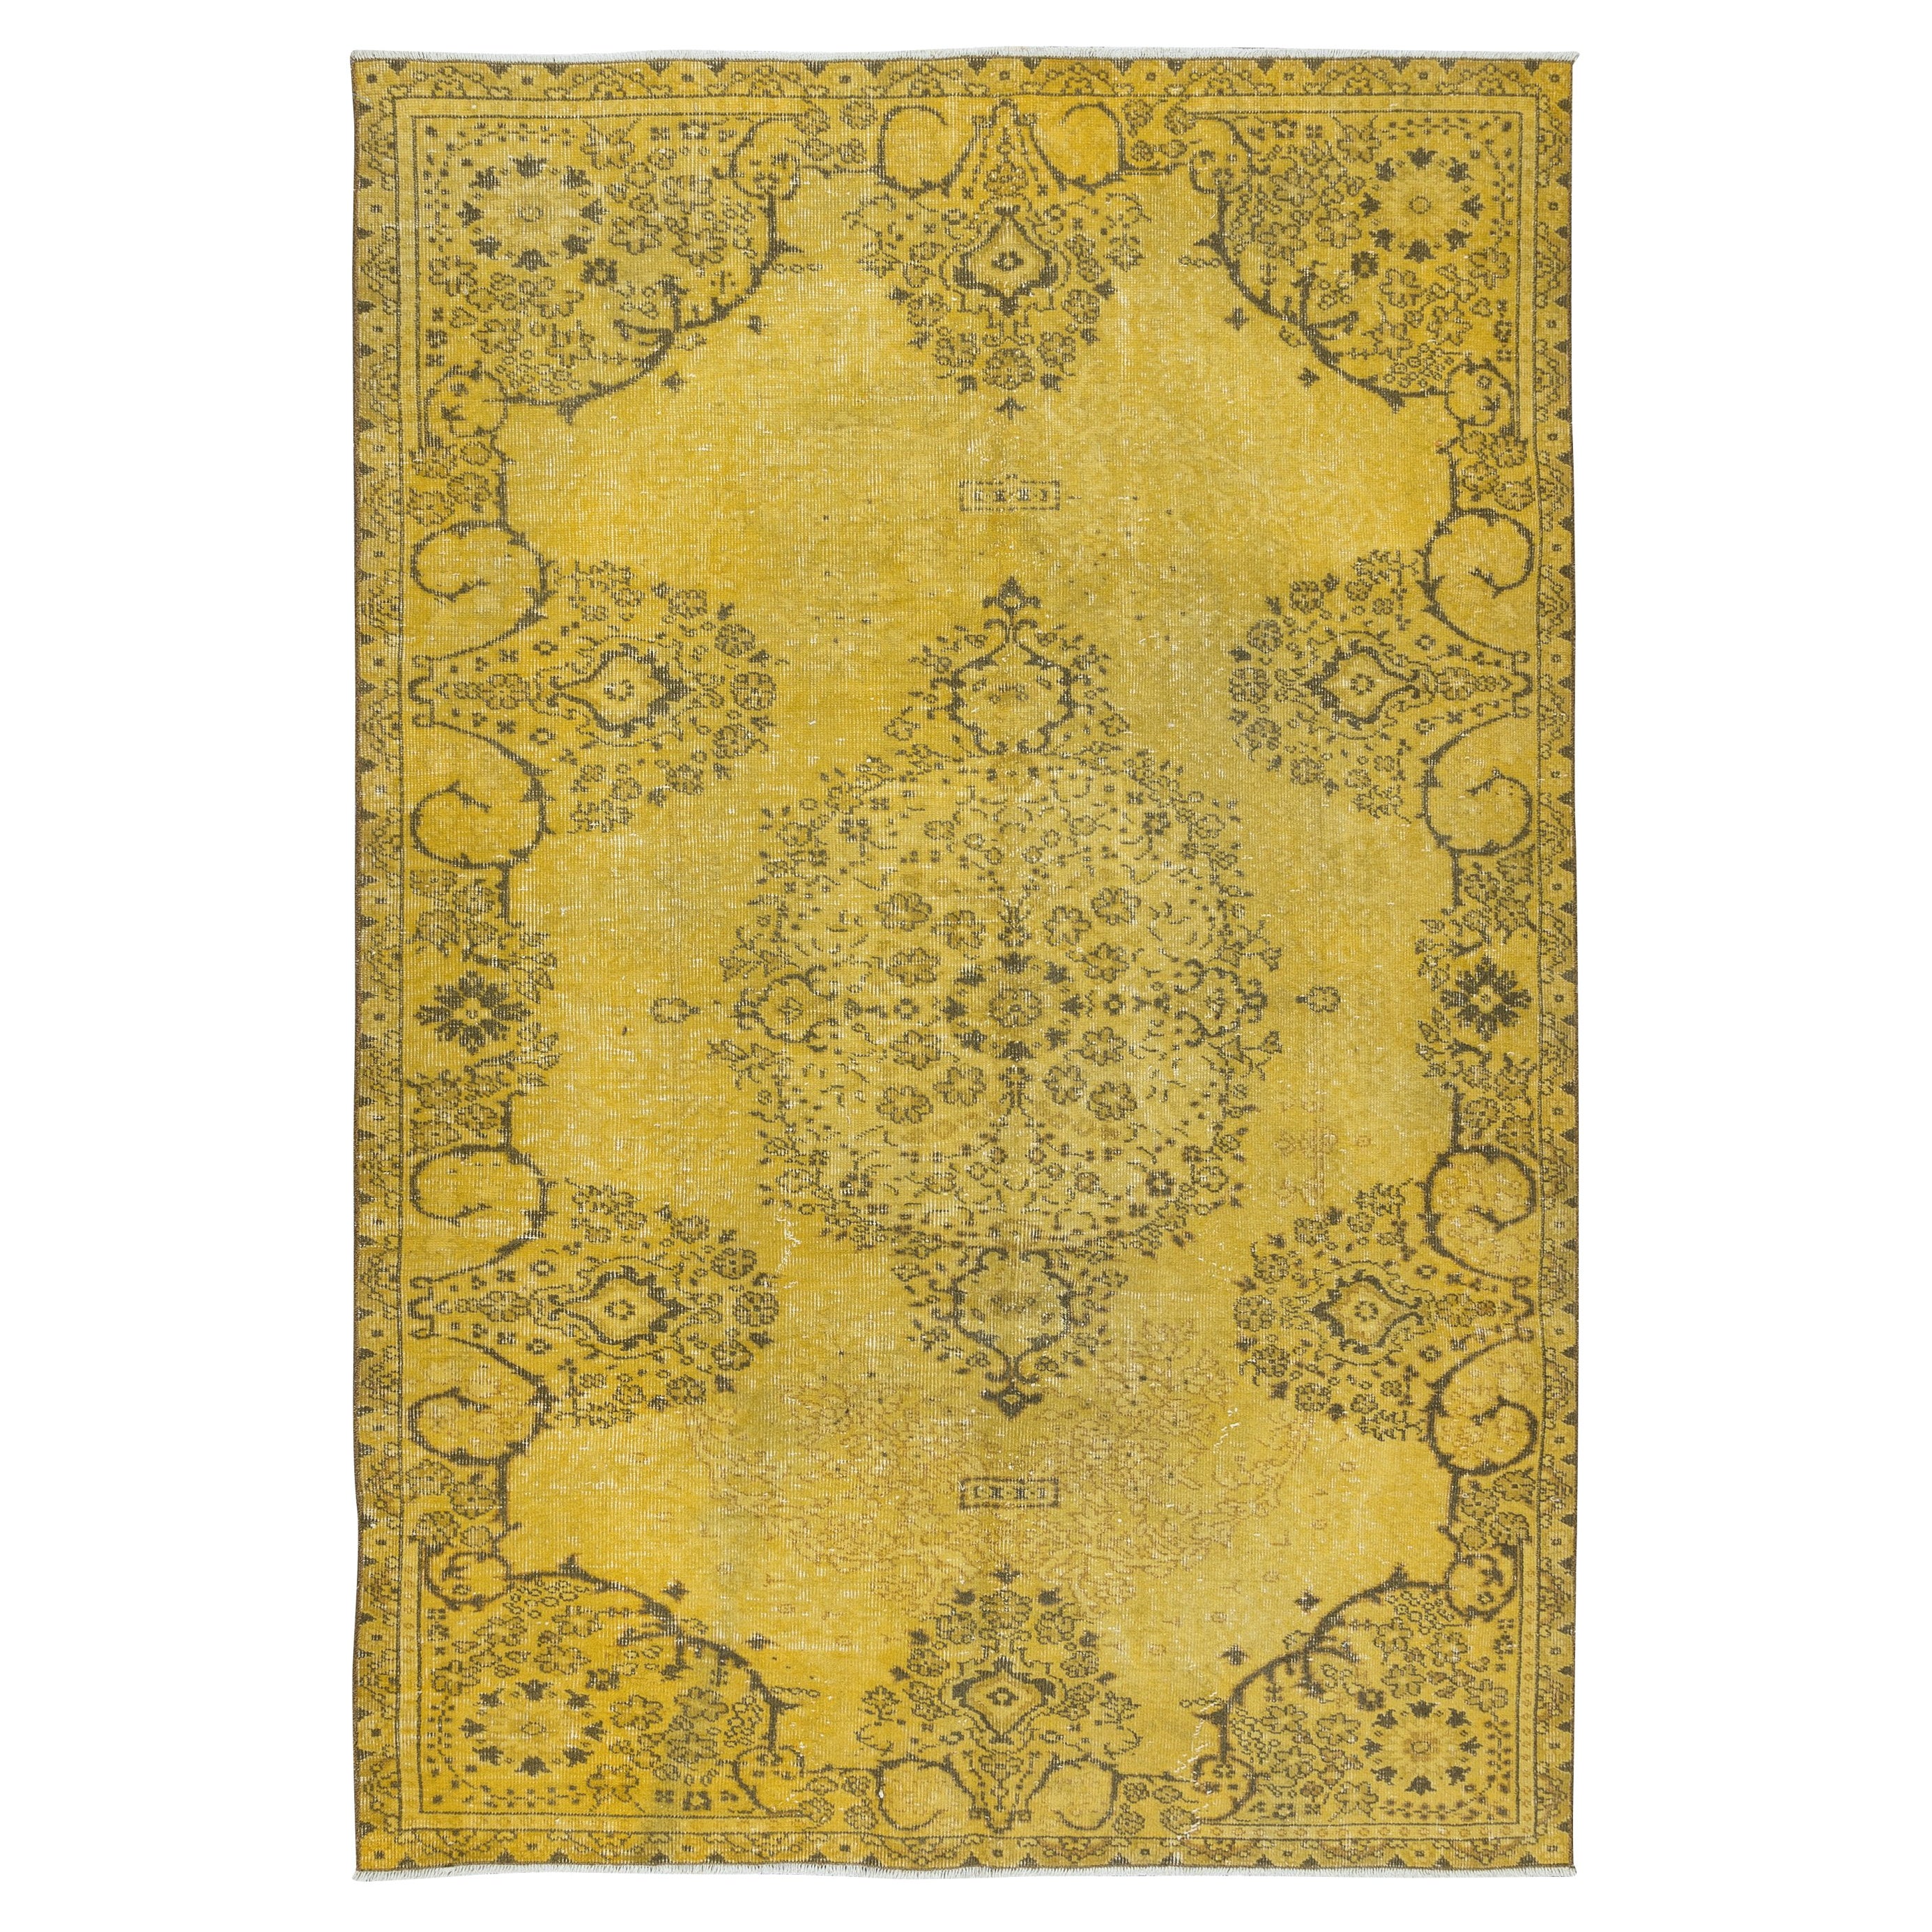 5.5x8 Ft Upcycled Handmade Turkish Area Rug, Contemporary Yellow OverDyed Carpet